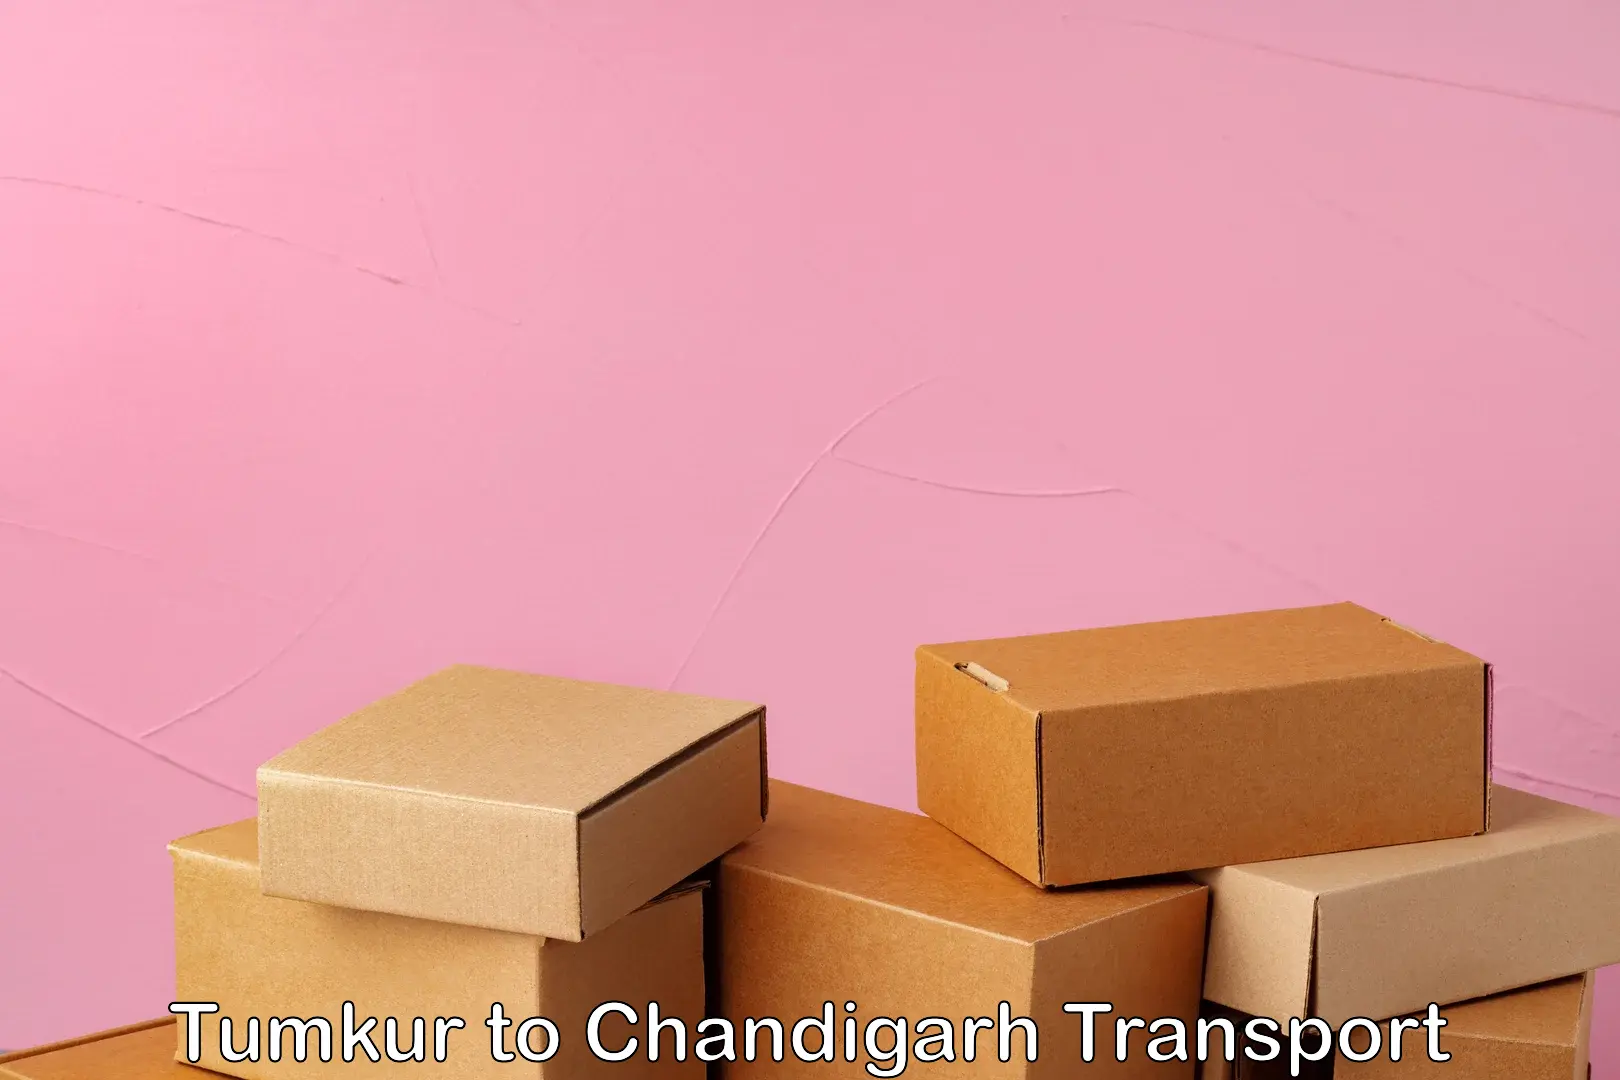 Nearby transport service Tumkur to Chandigarh